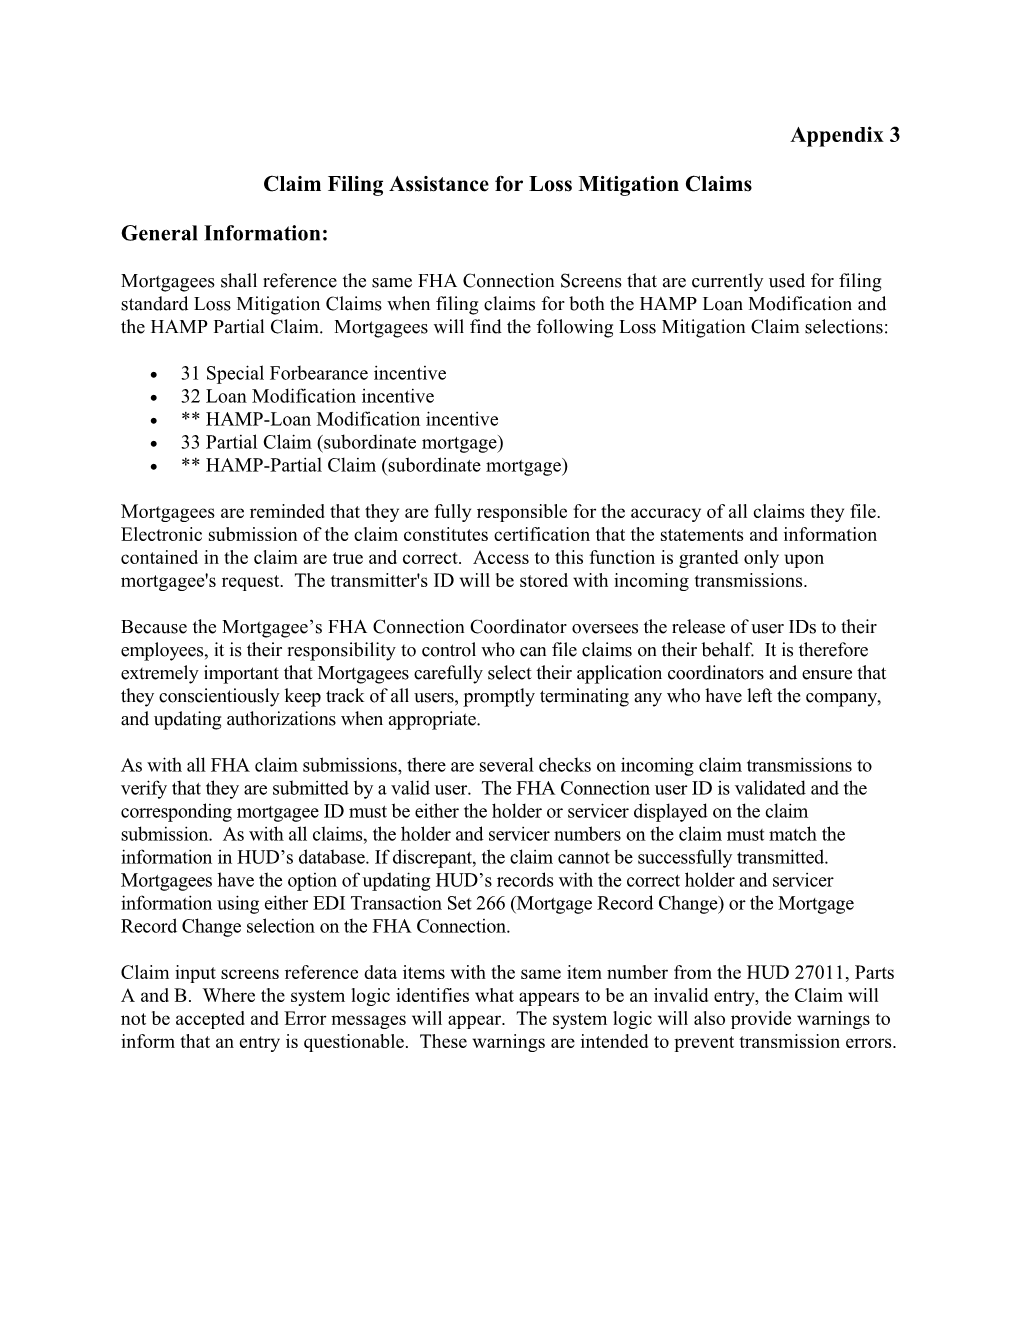 Claim Filing Assistance for Loss Mitigation Claims